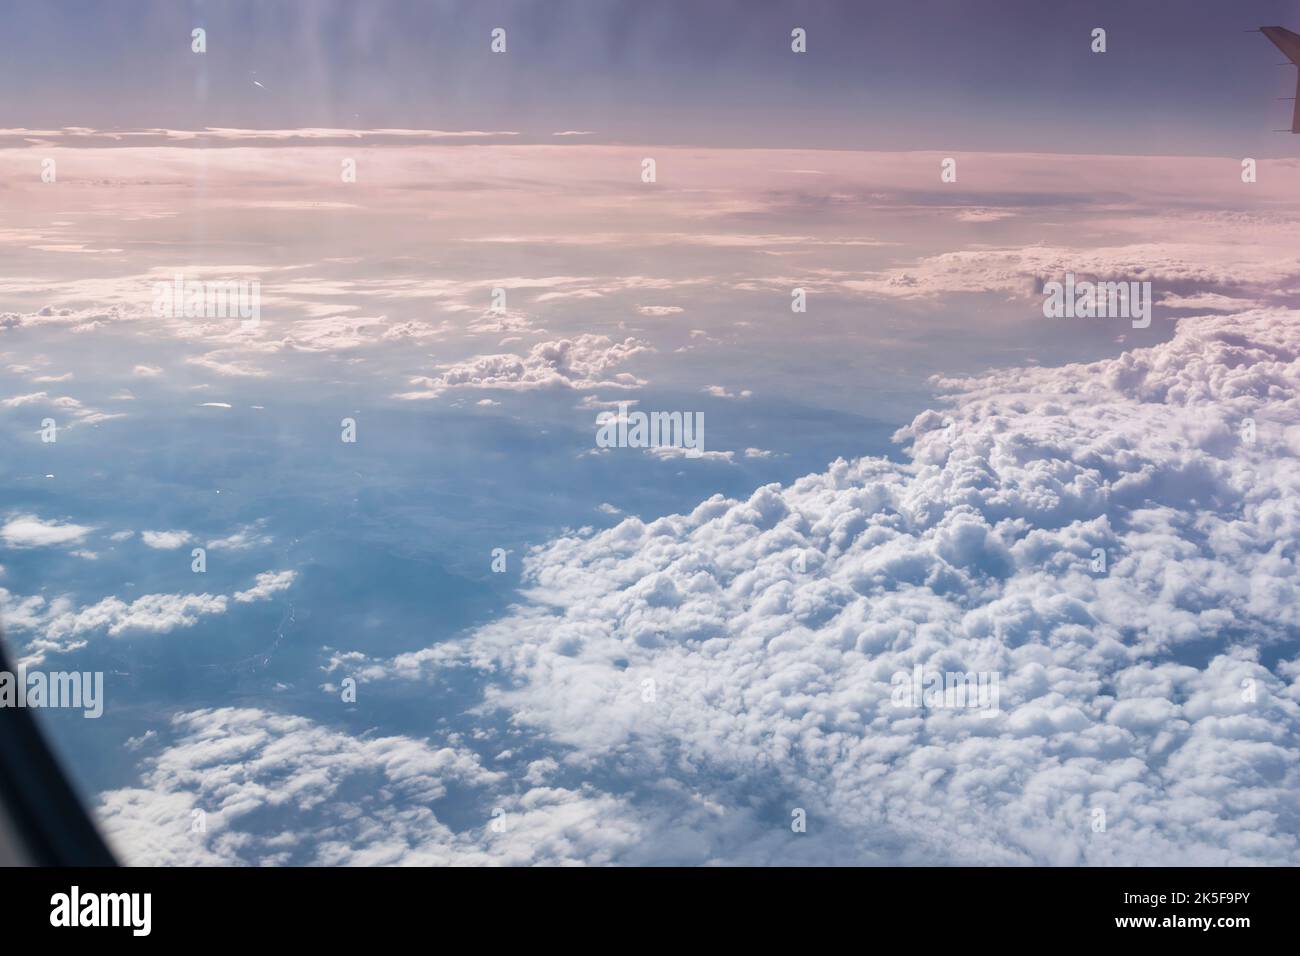 A landscape shot high above the airplane cloud. Stock Photo